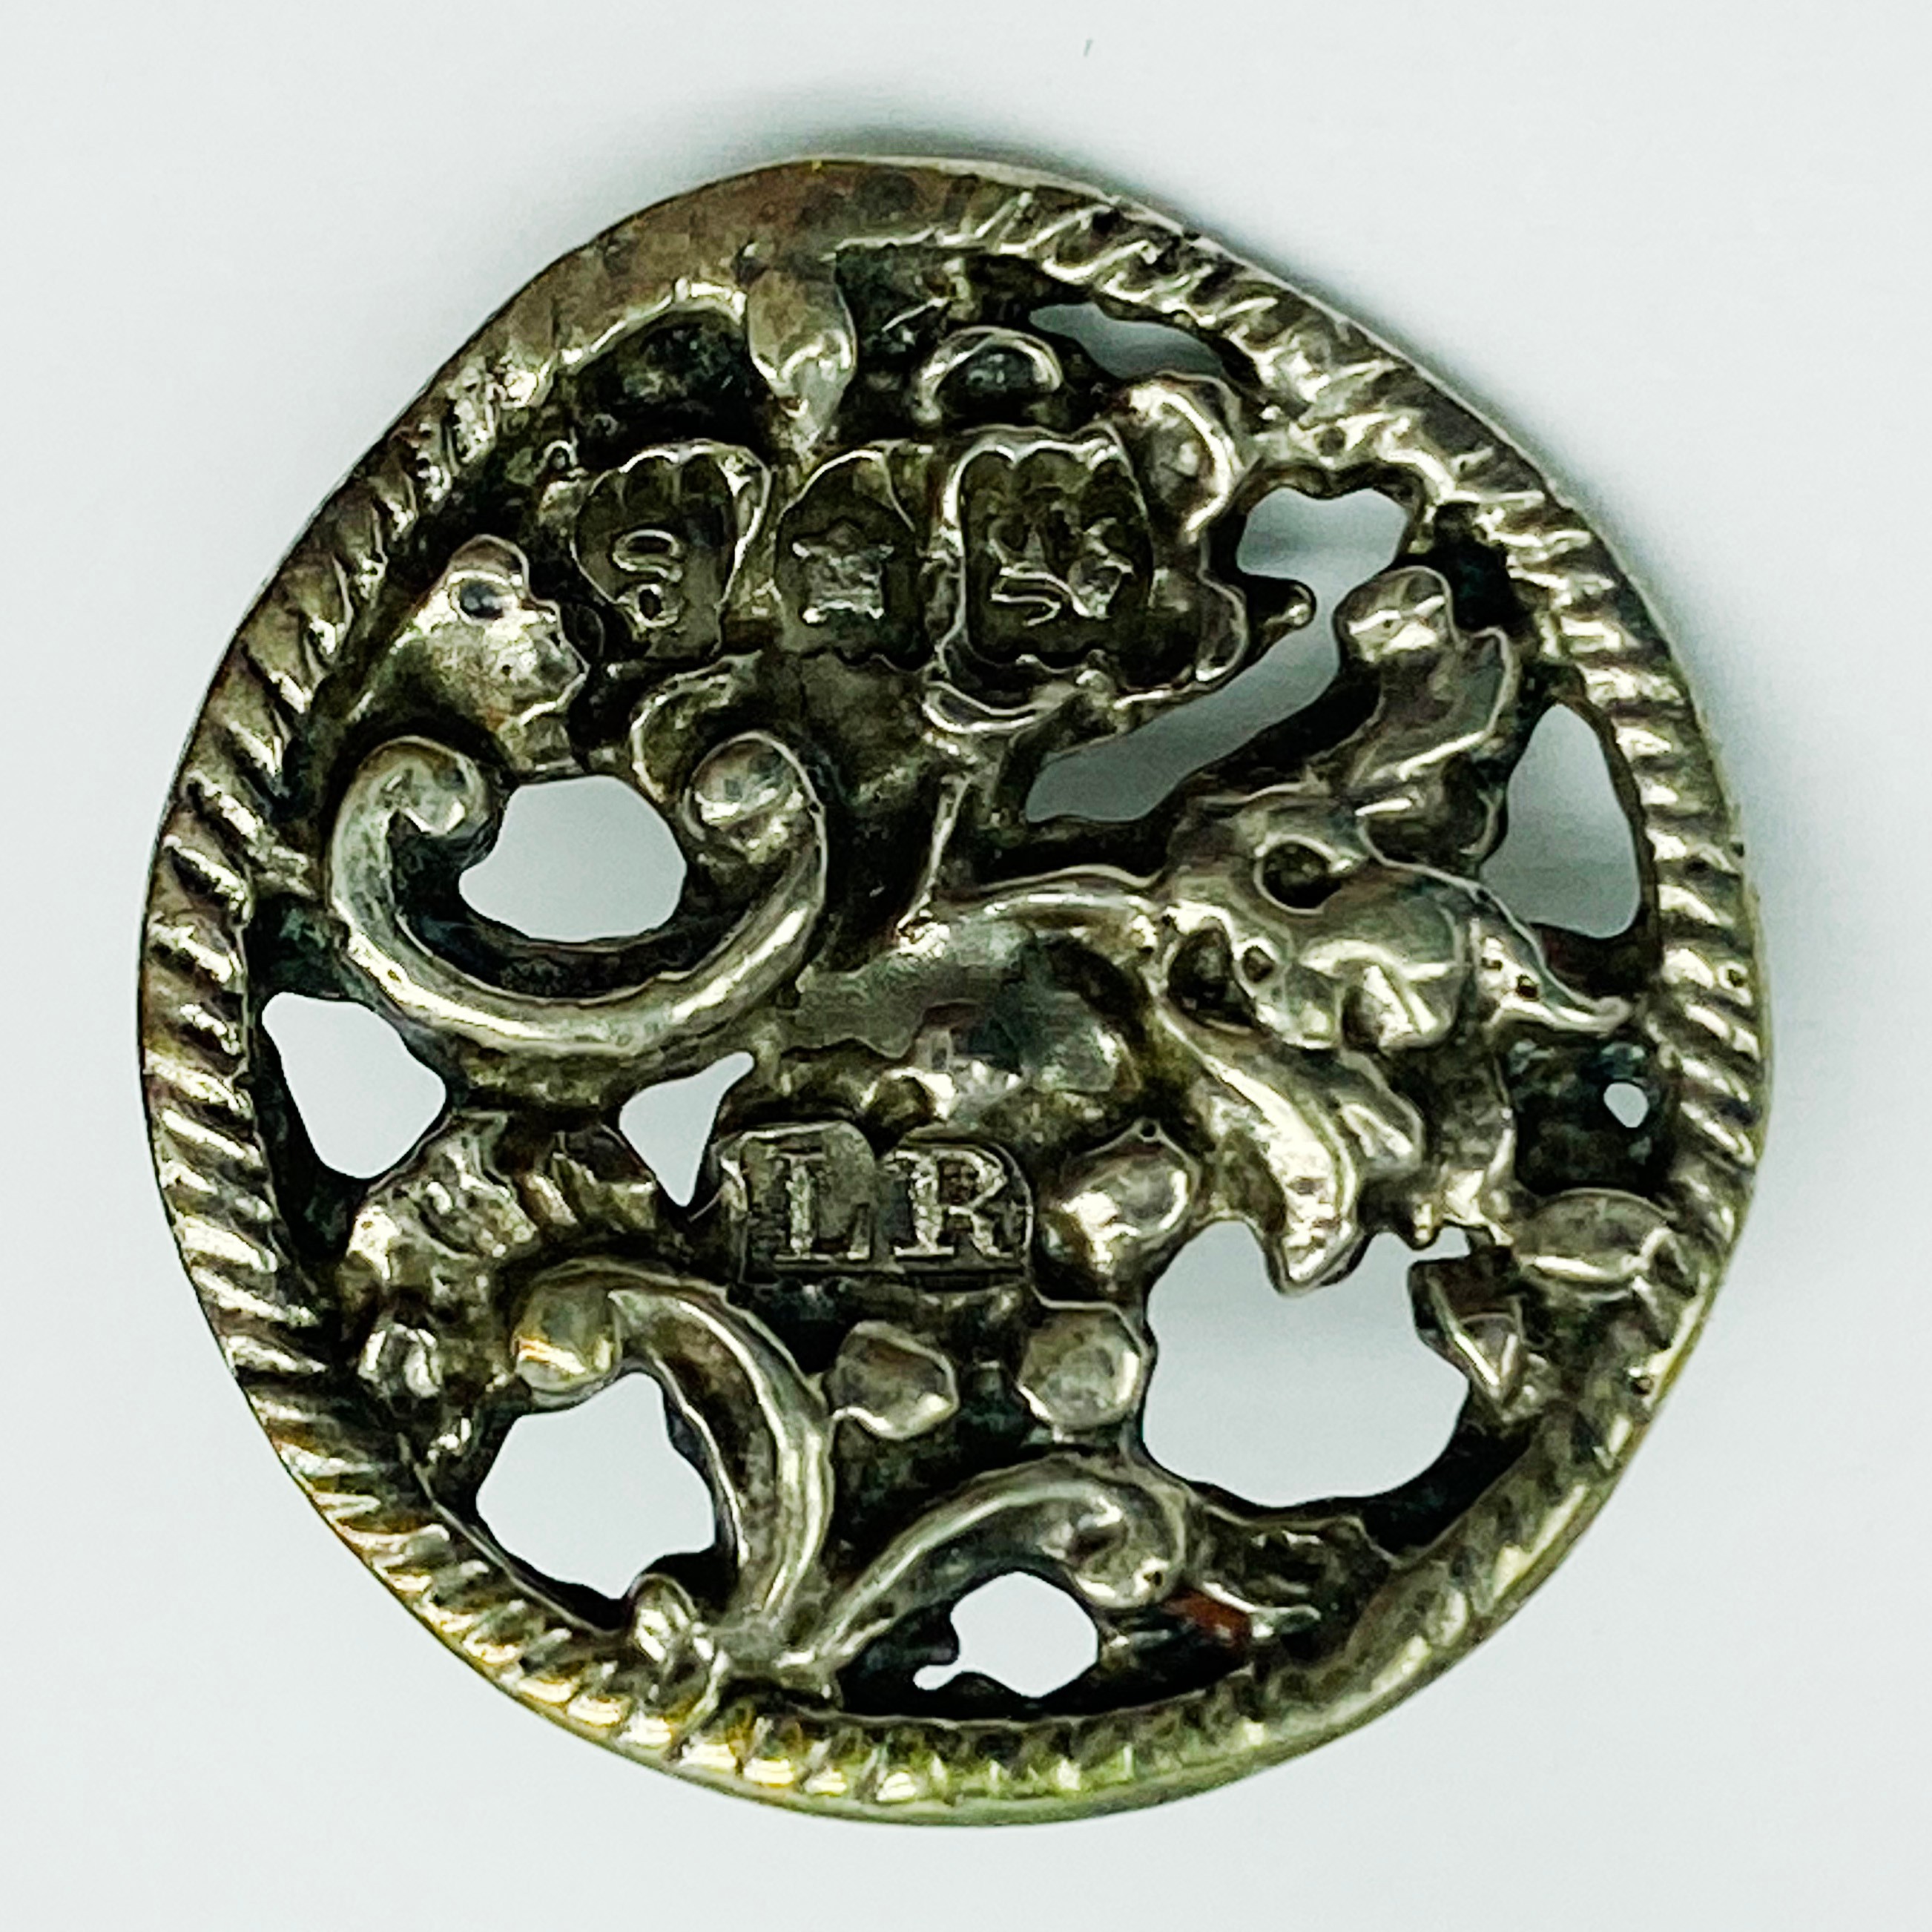 CASED SET OF SIX HALLMARKED ANTIQUE SILVER BUTTONS LONDON 1902 FLORAL DESIGN BY LOEWE ROSENTHAL - Image 2 of 4